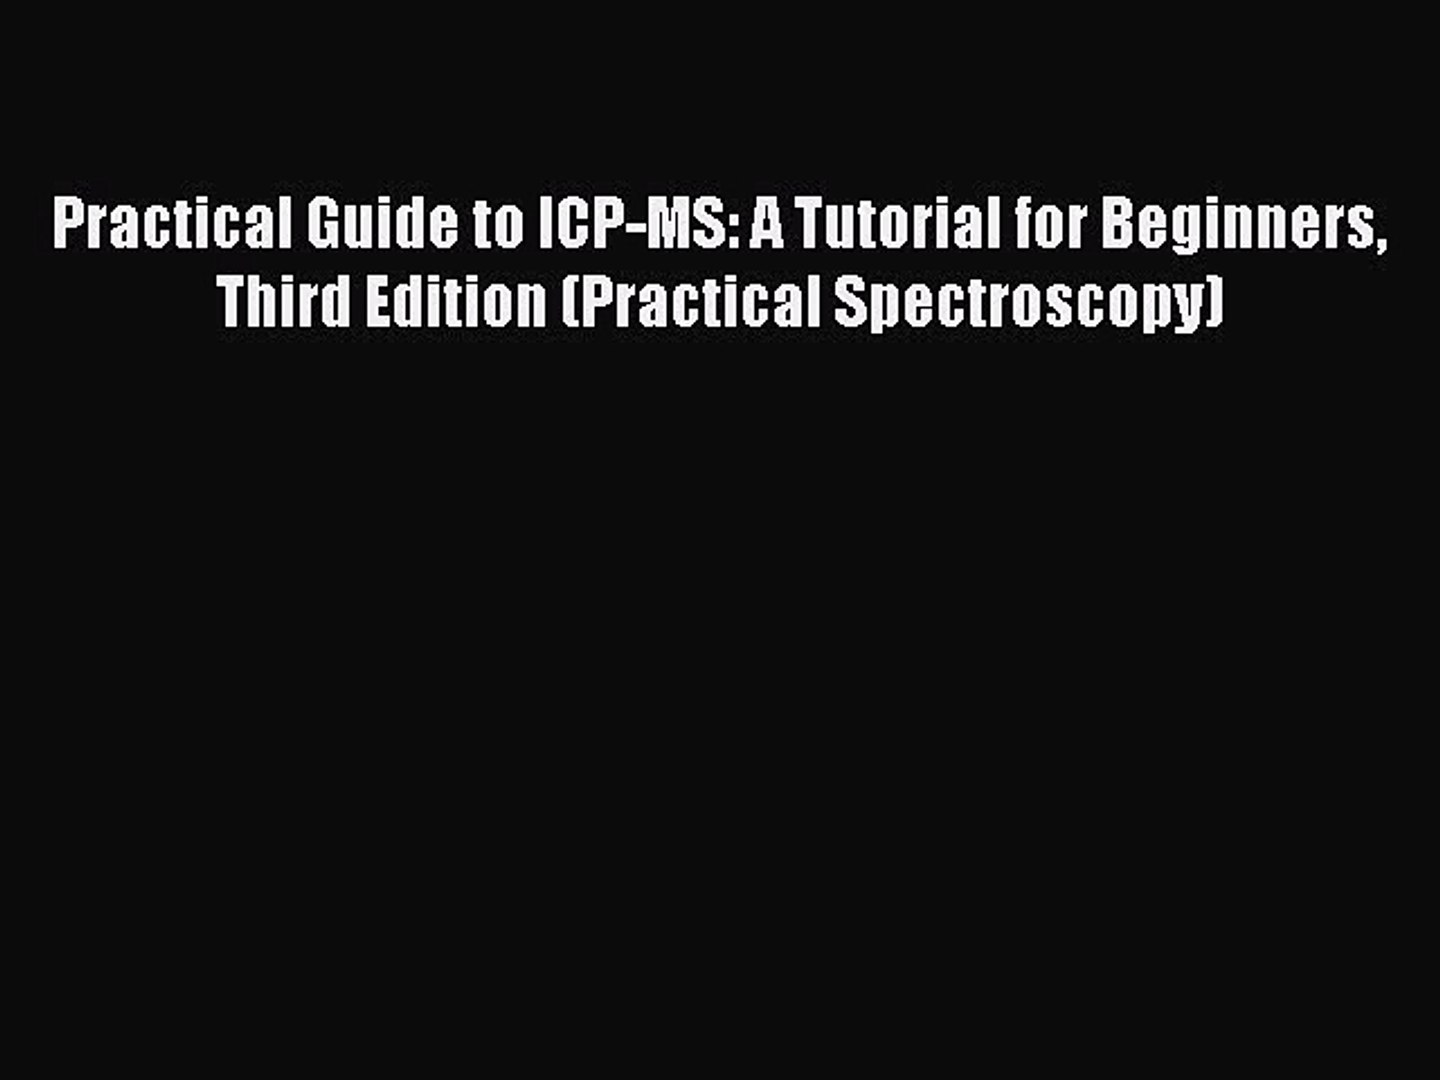 Read Practical Guide to ICP-MS: A Tutorial for Beginners Third Edition (Practical Spectroscopy)